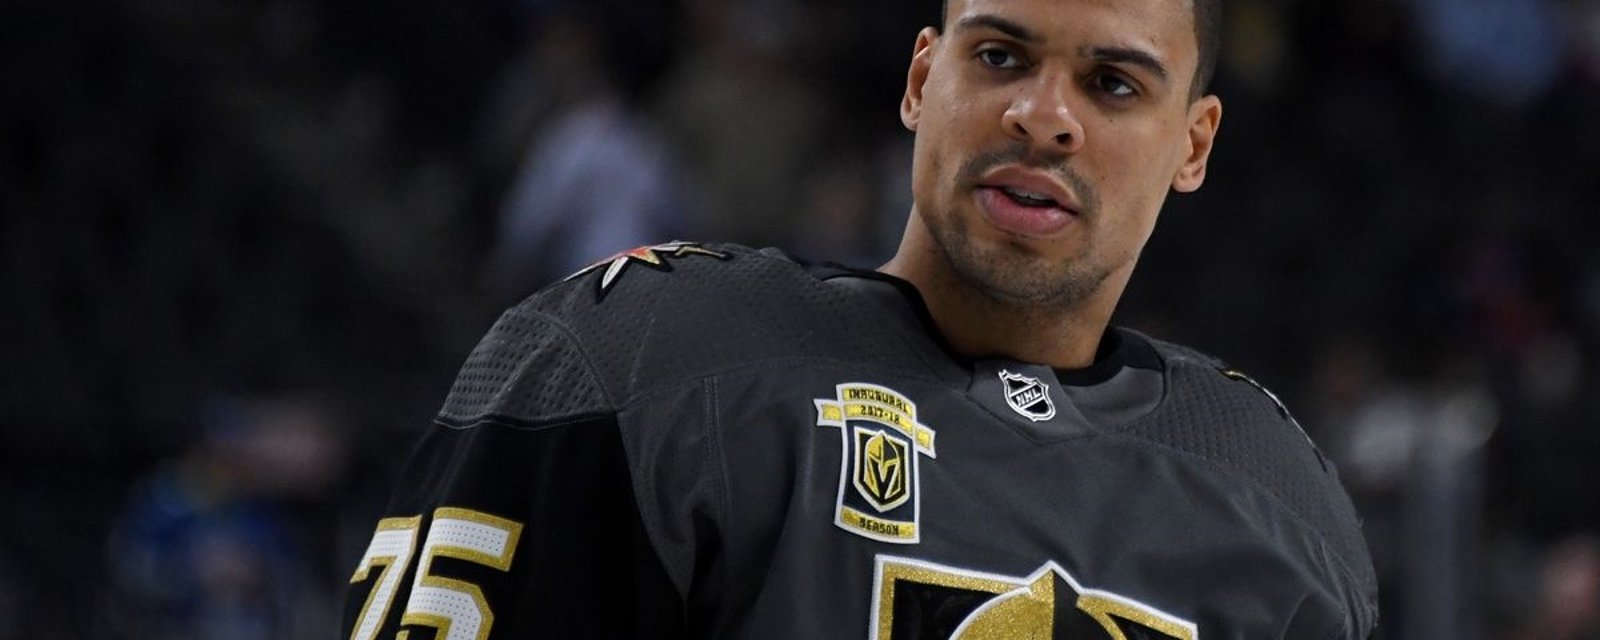 Rumor: Ryan Reaves will be suspended, but it may not be for very long.